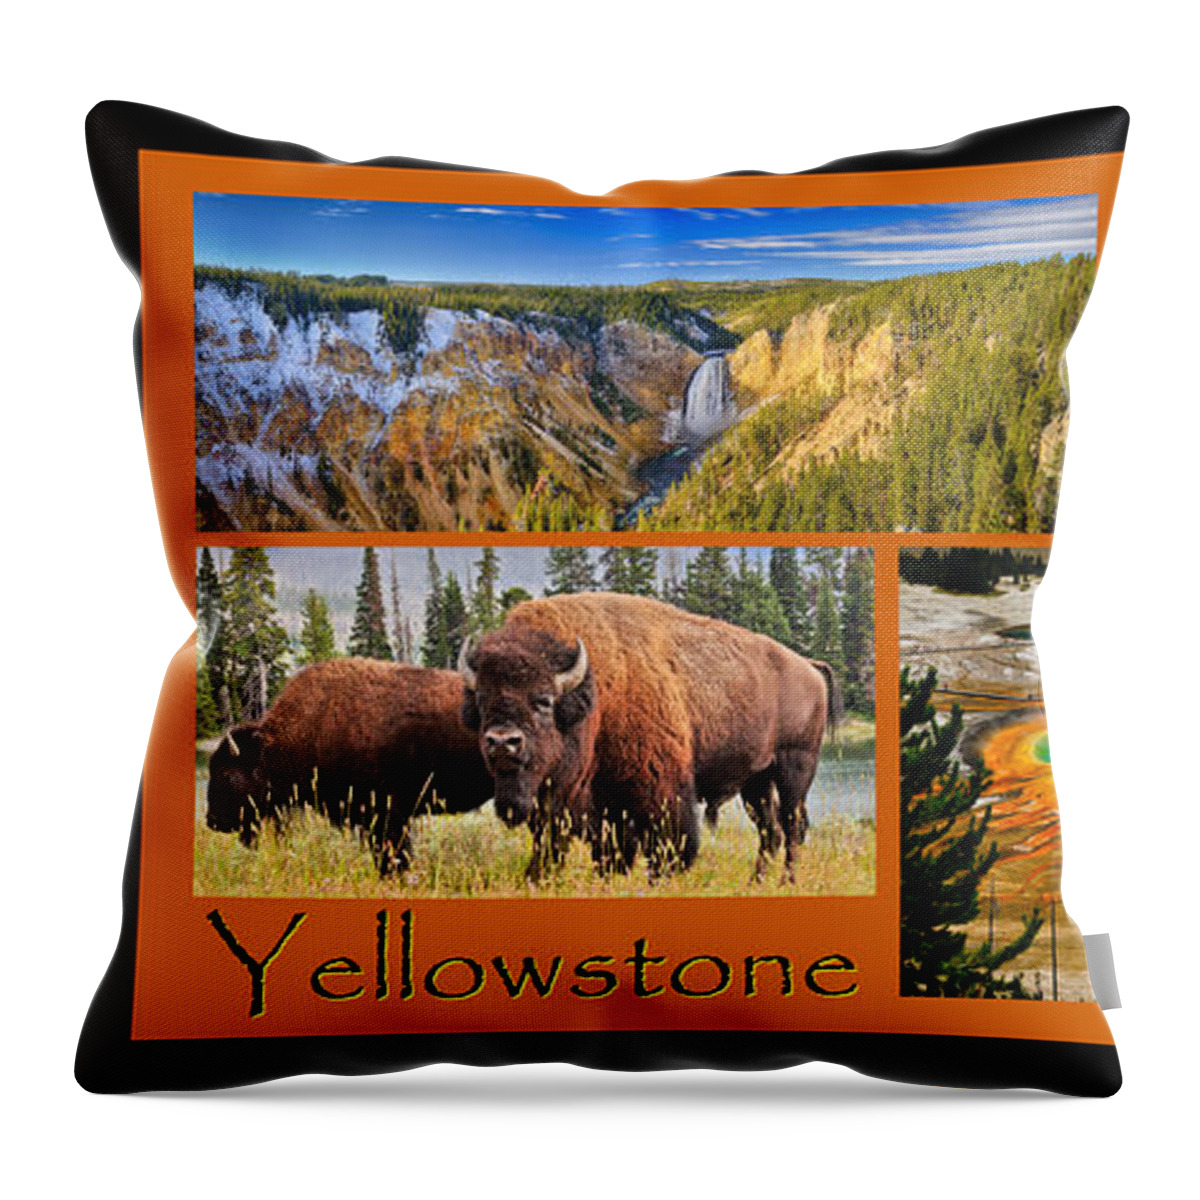 Yellowstone Throw Pillow featuring the photograph Yellowstone National Park by Greg Norrell